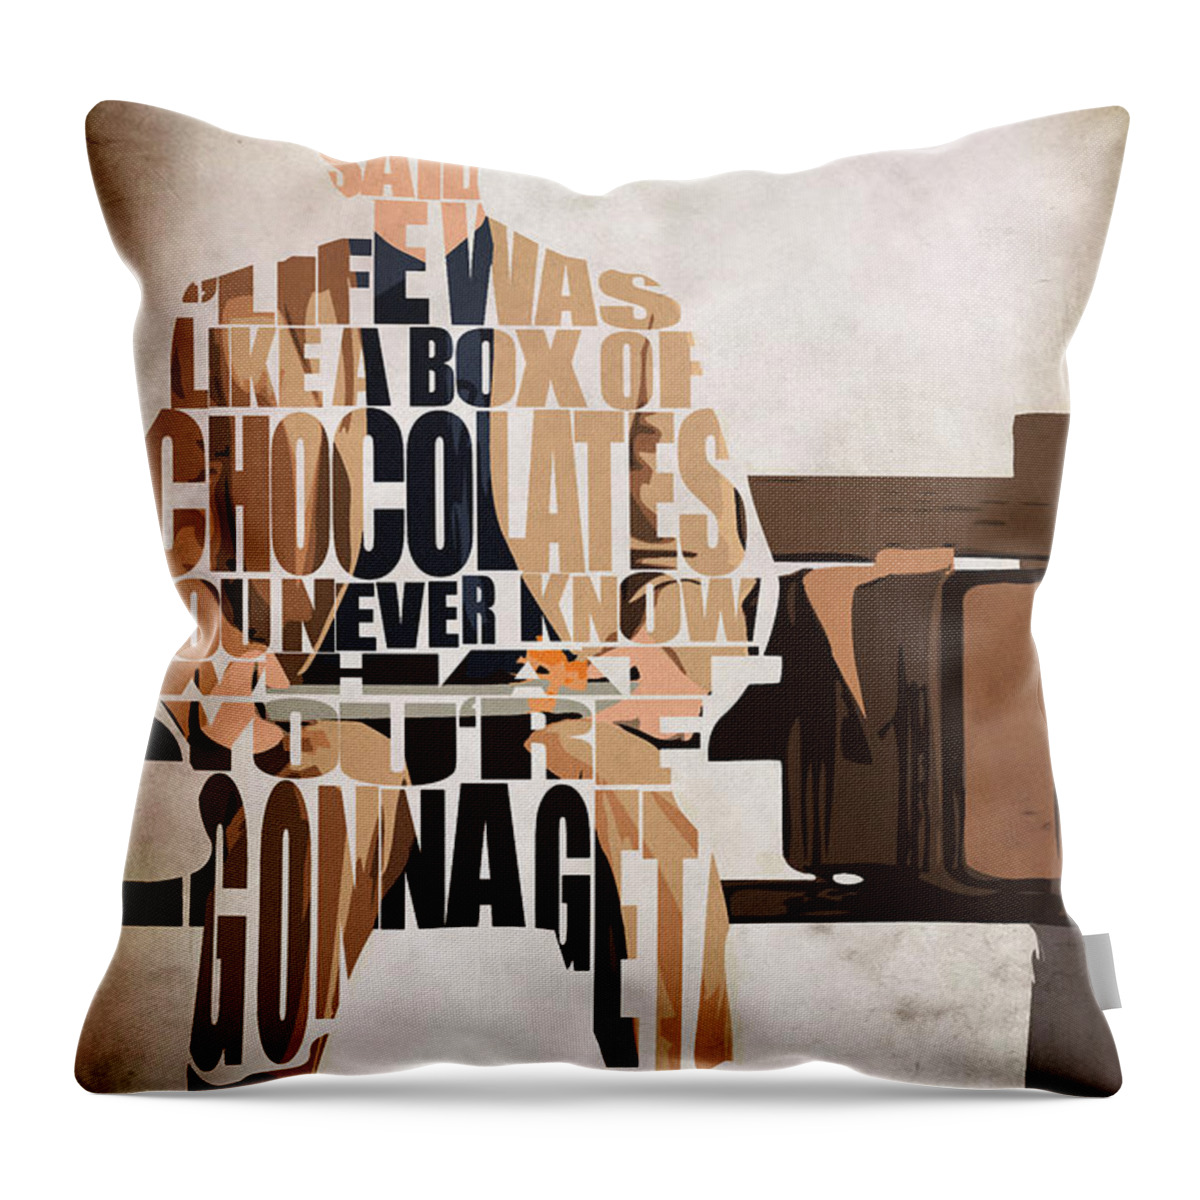 Forrest Gump Throw Pillow featuring the painting Forrest Gump - Tom Hanks by Inspirowl Design